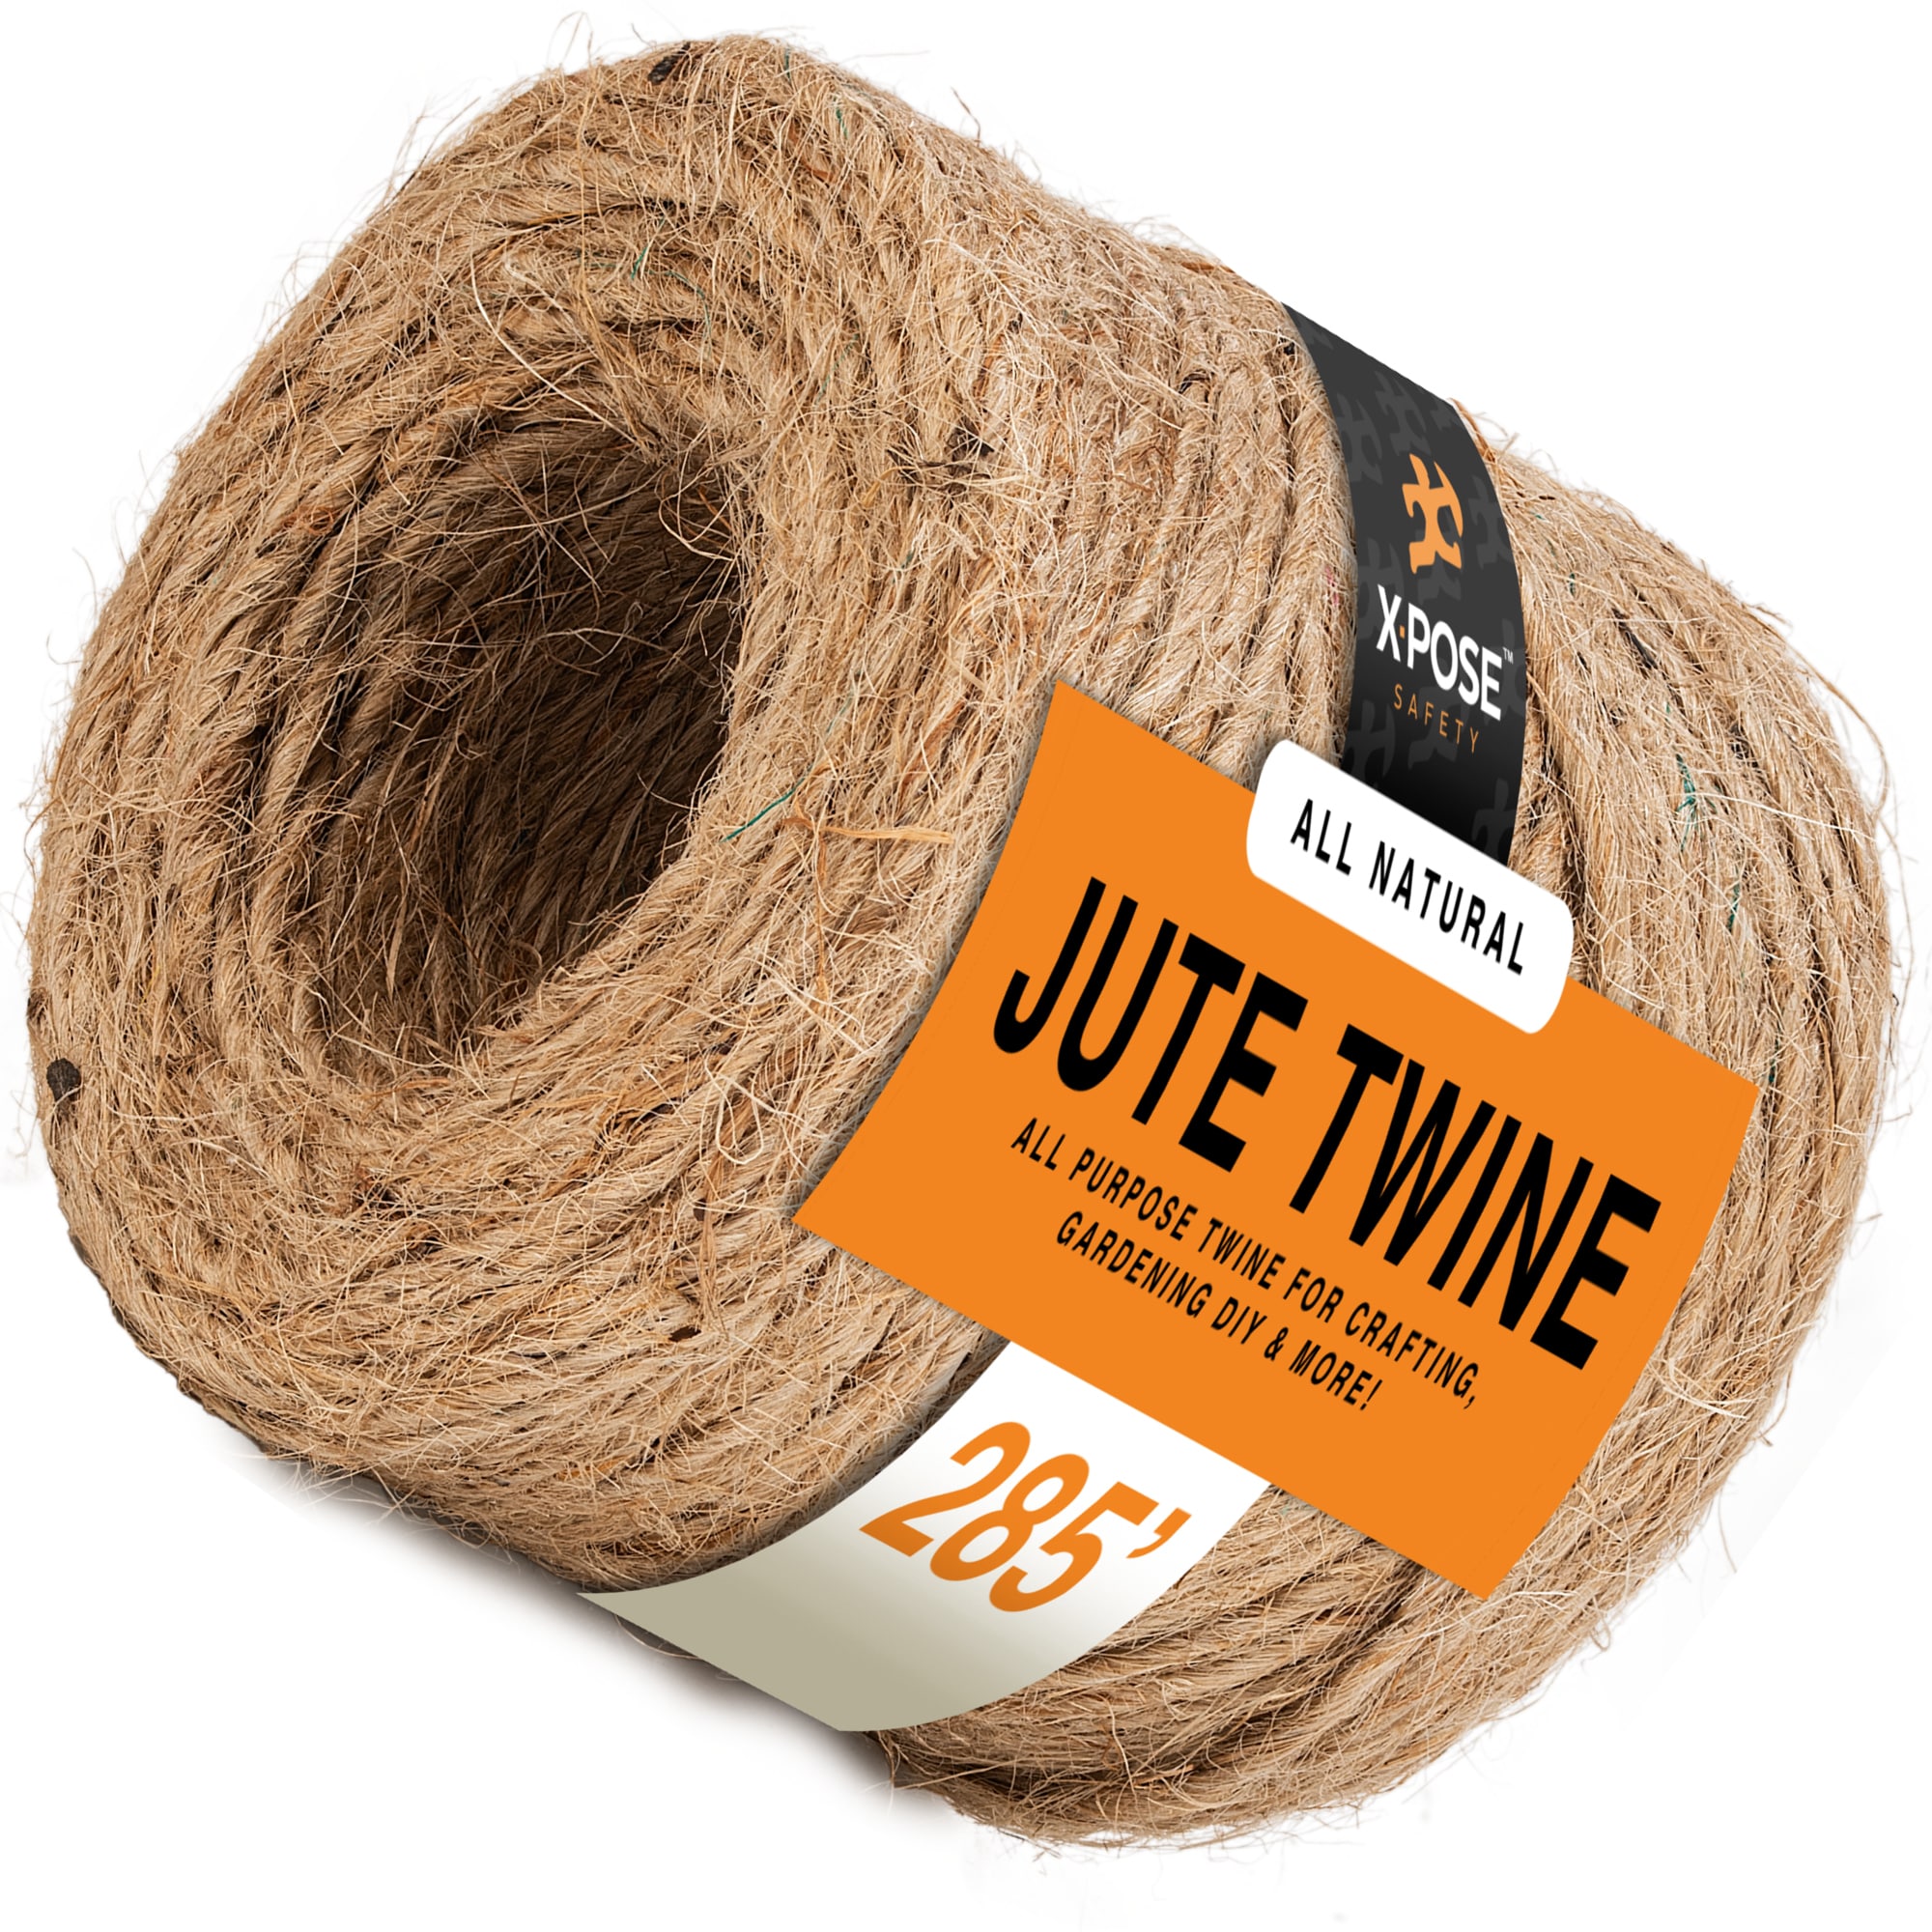 XPOSE SAFETY Jute Twine - Brown Roll 285 Ft Jute Twine for Crafts - Soft  Yet Strong Natural Jute String, Burlap String Packaging, Wrapping, Packing  Materials, Decorative Rope Cord for Hanging Craft